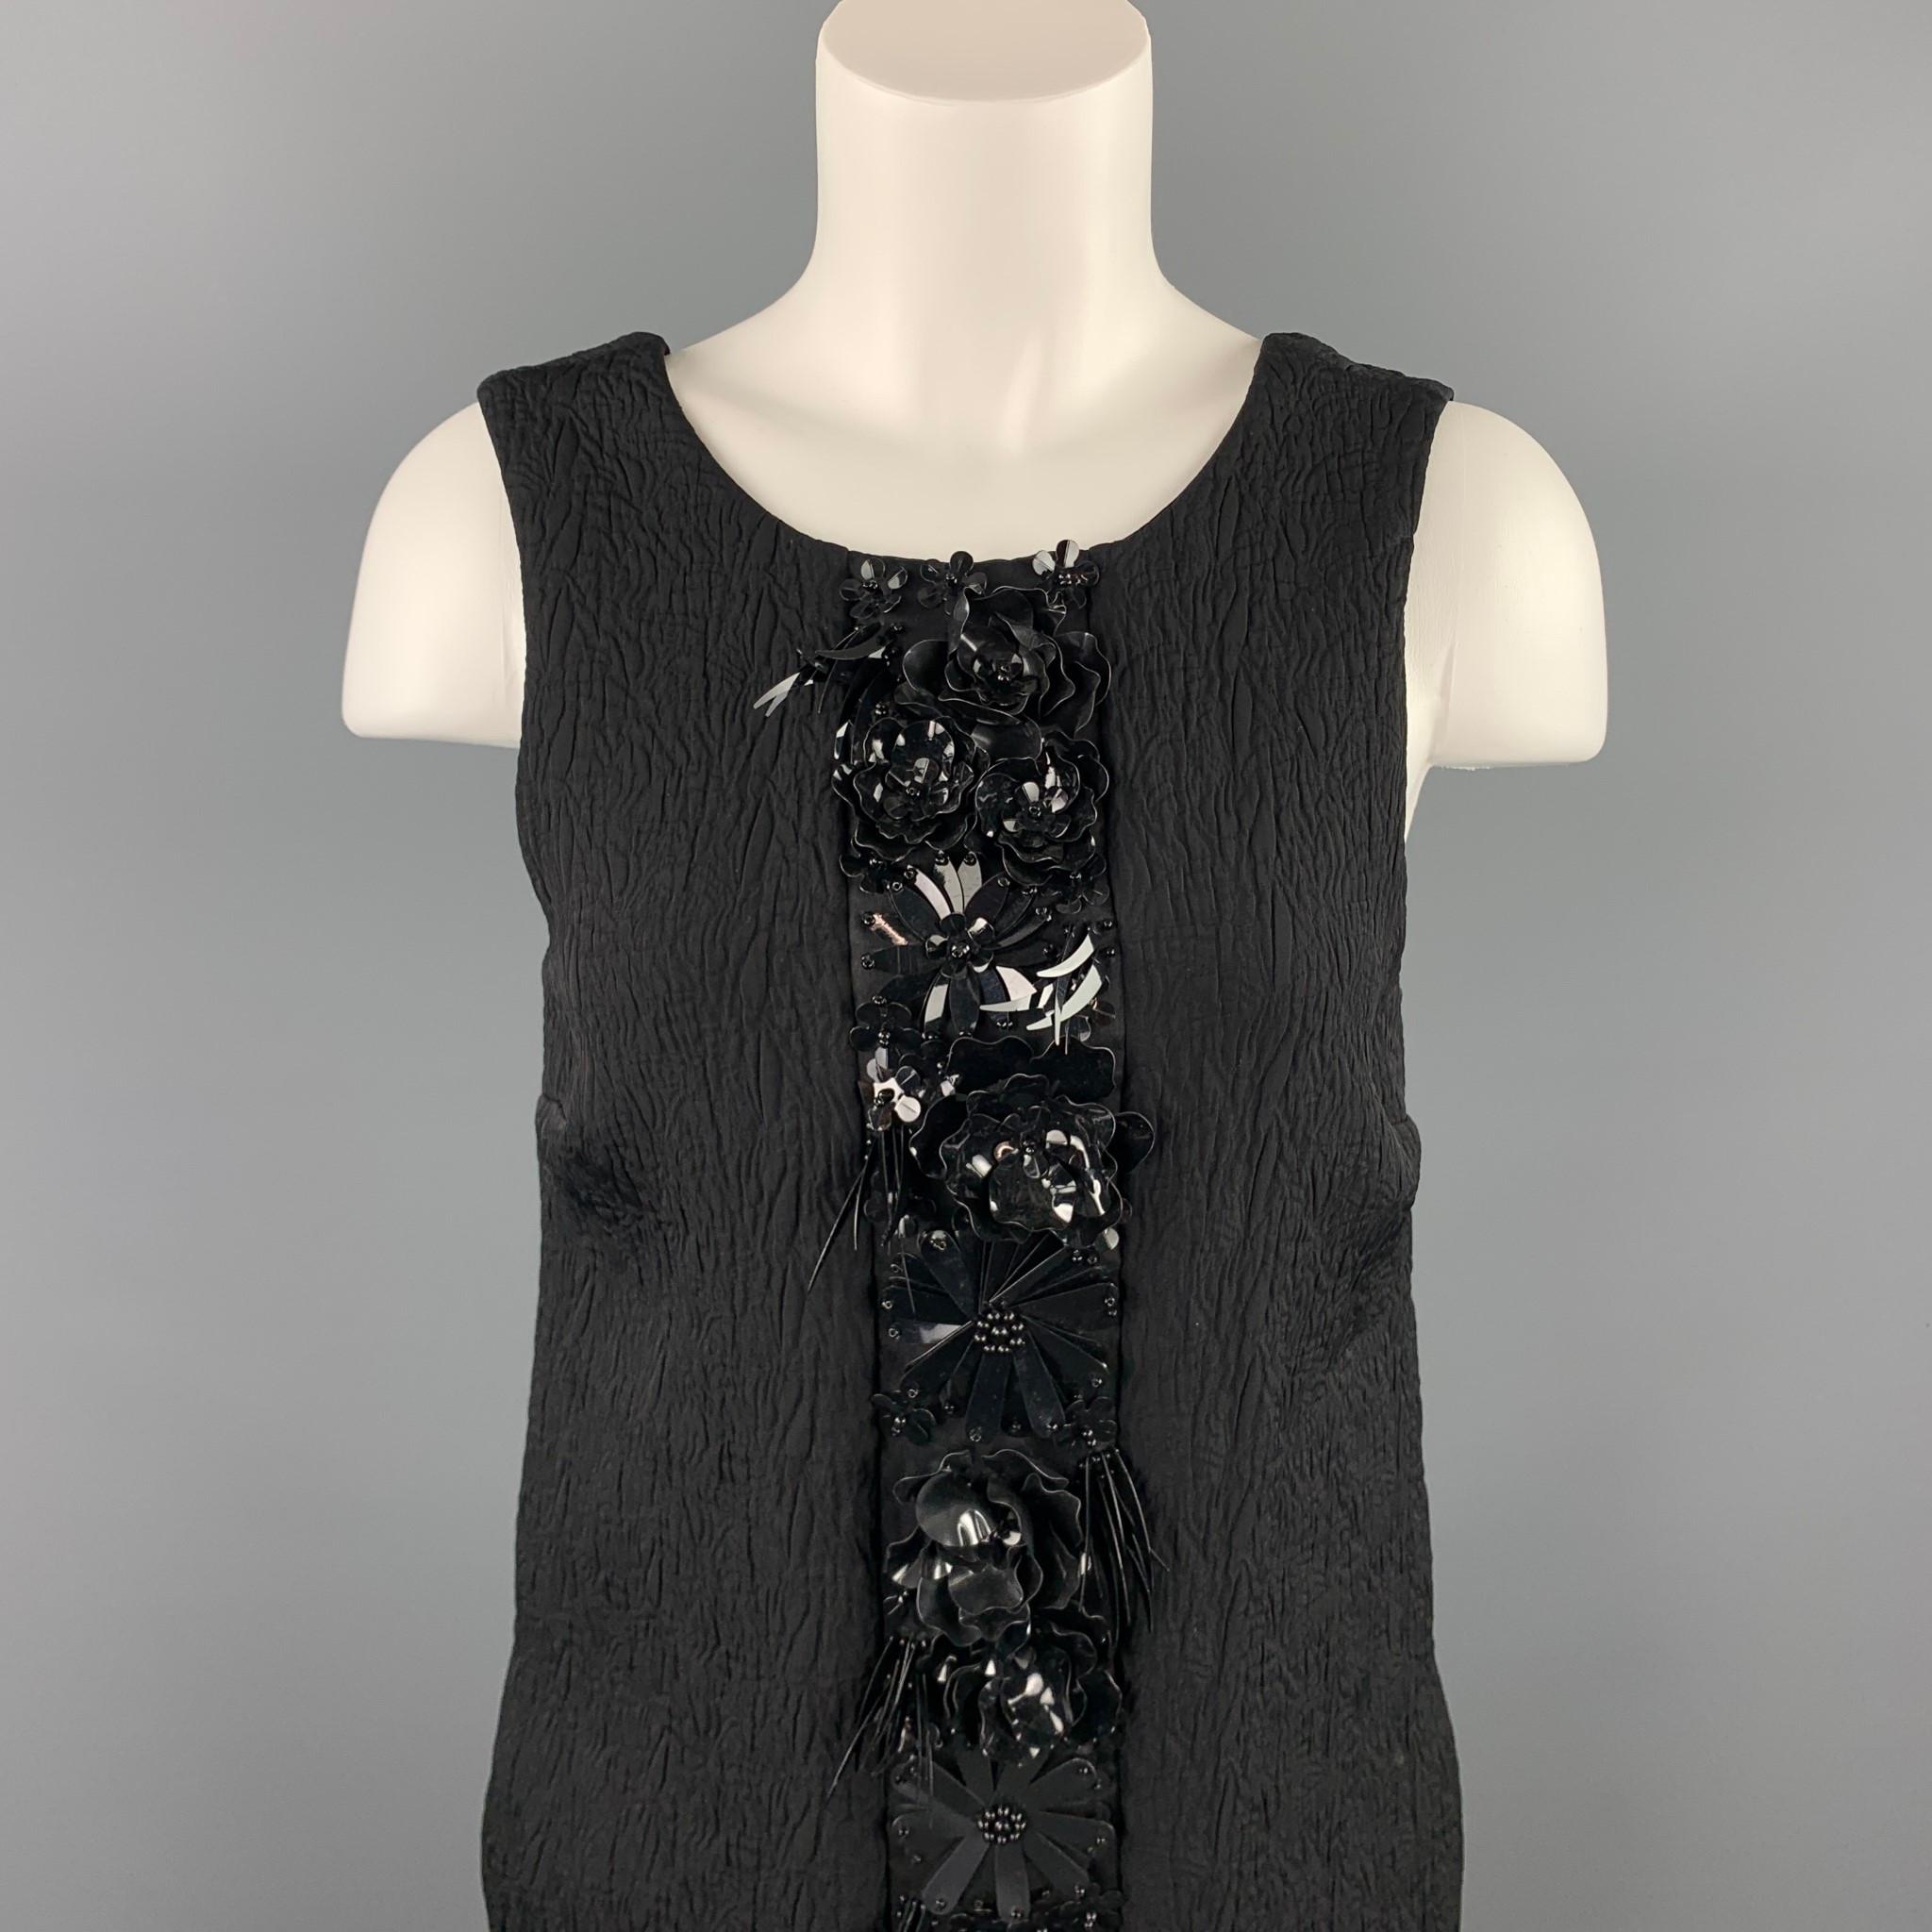 MSGM dress comes in a black jacquard viscose blend with front embellished designs featuring a shift style, slit pockets, and a back zip up closure. Made in Italy.

Very Good Pre-Owned Condition.
Marked: 40

Measurements:

Bust: 32 in. 
Waist: 34 in.